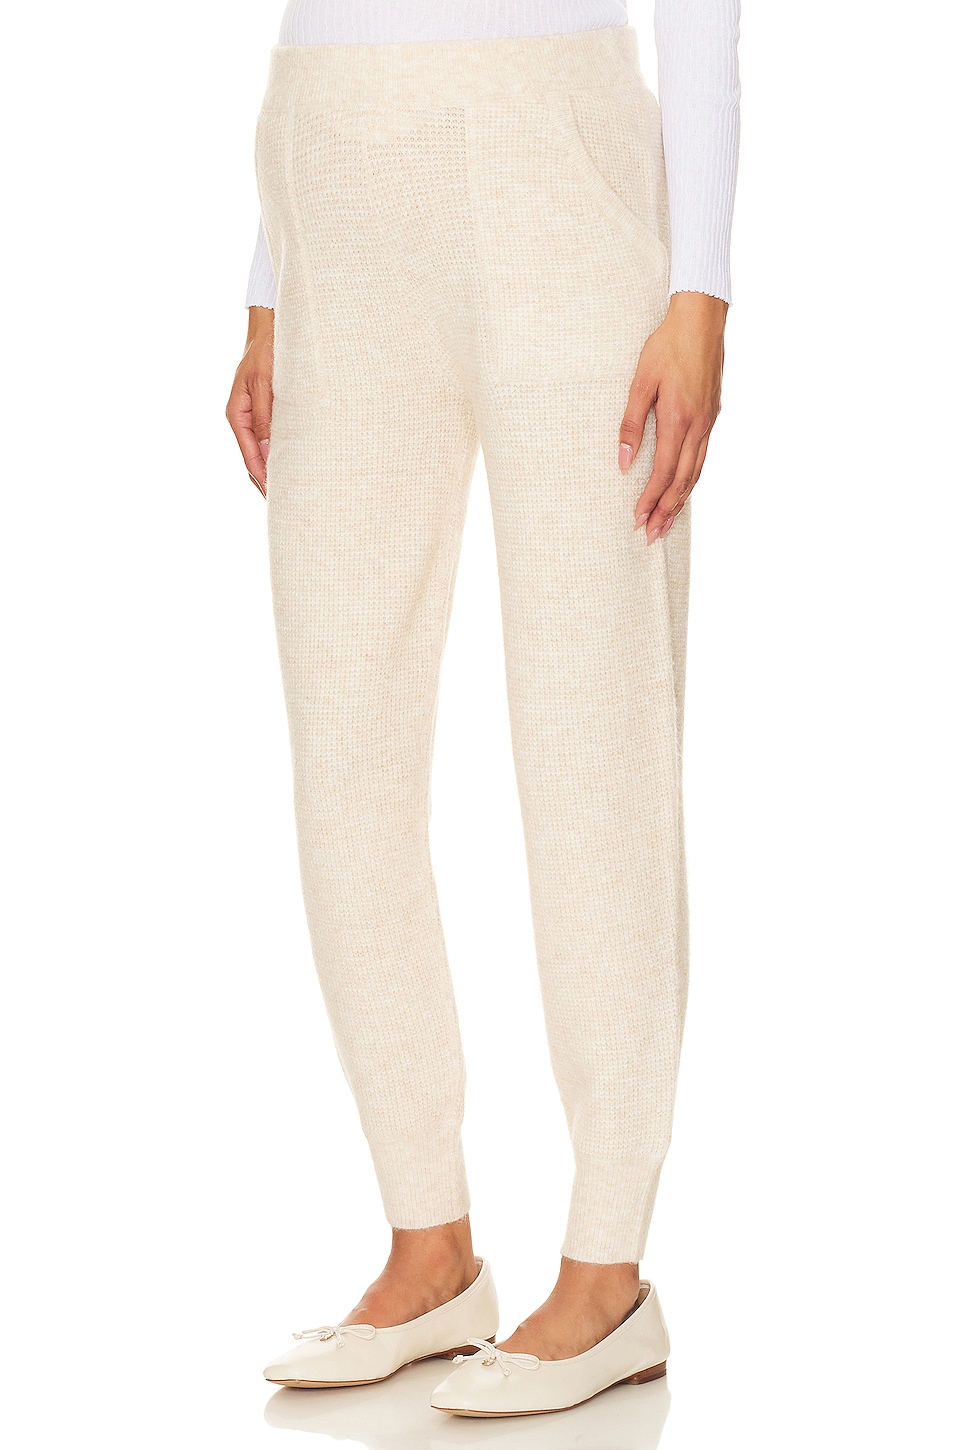 HATCH The Cozy Waffle Knit Jogger in Oatmeal Melange